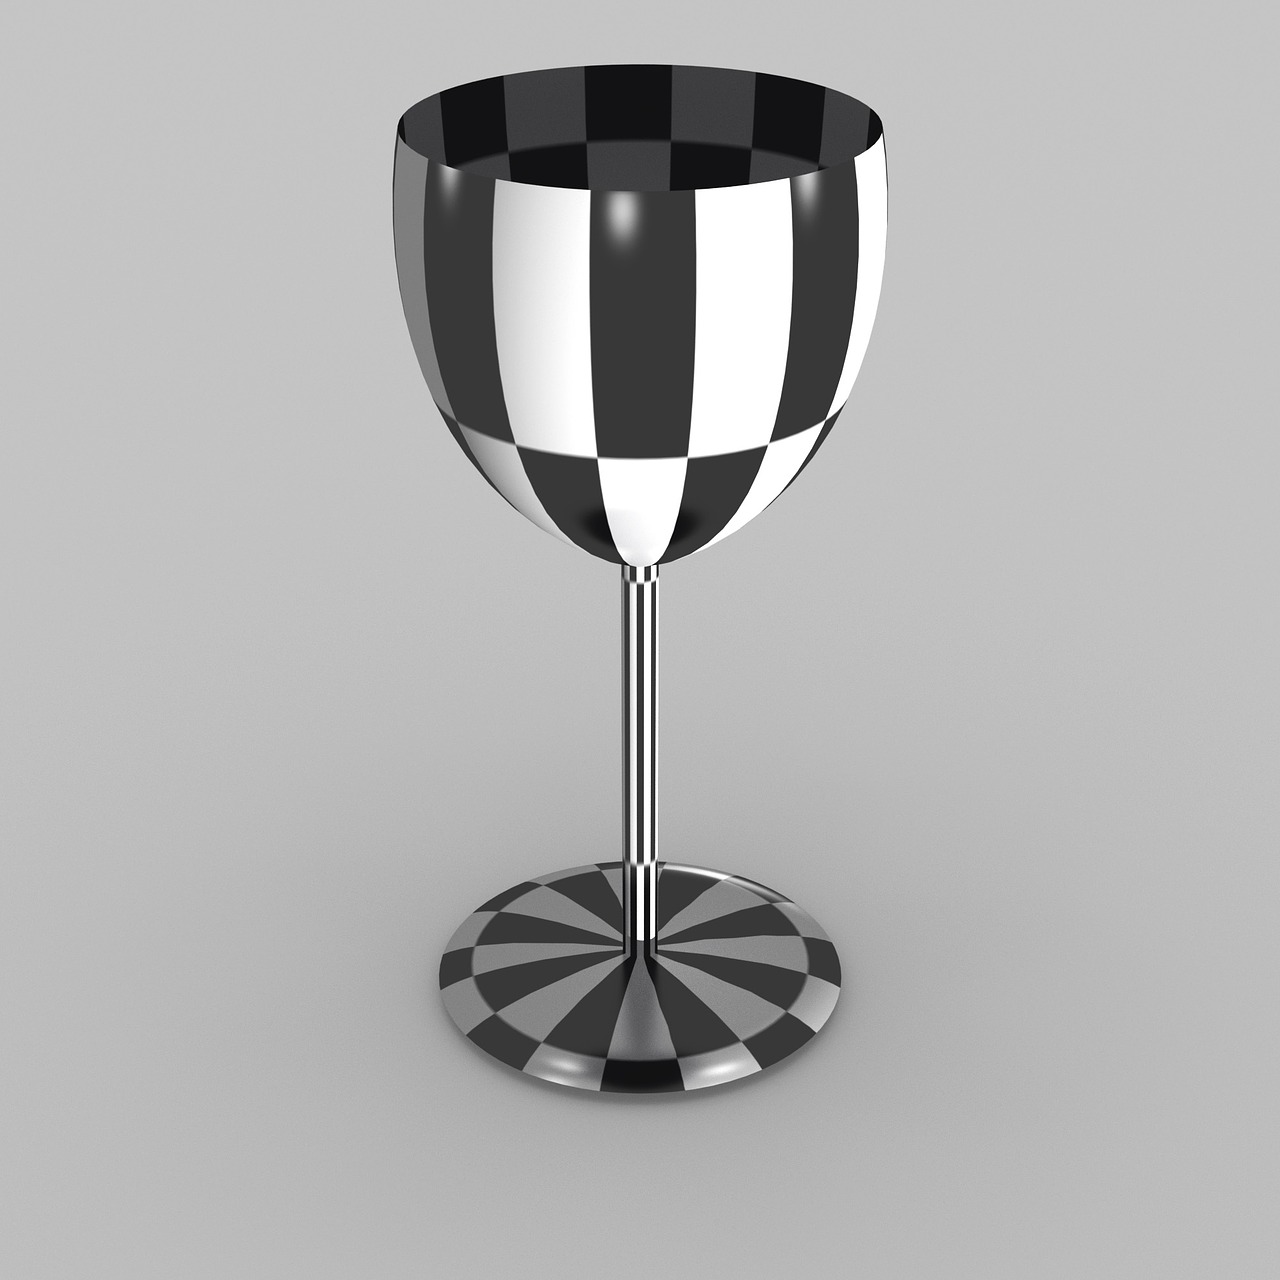 chalice chequered 3d free photo